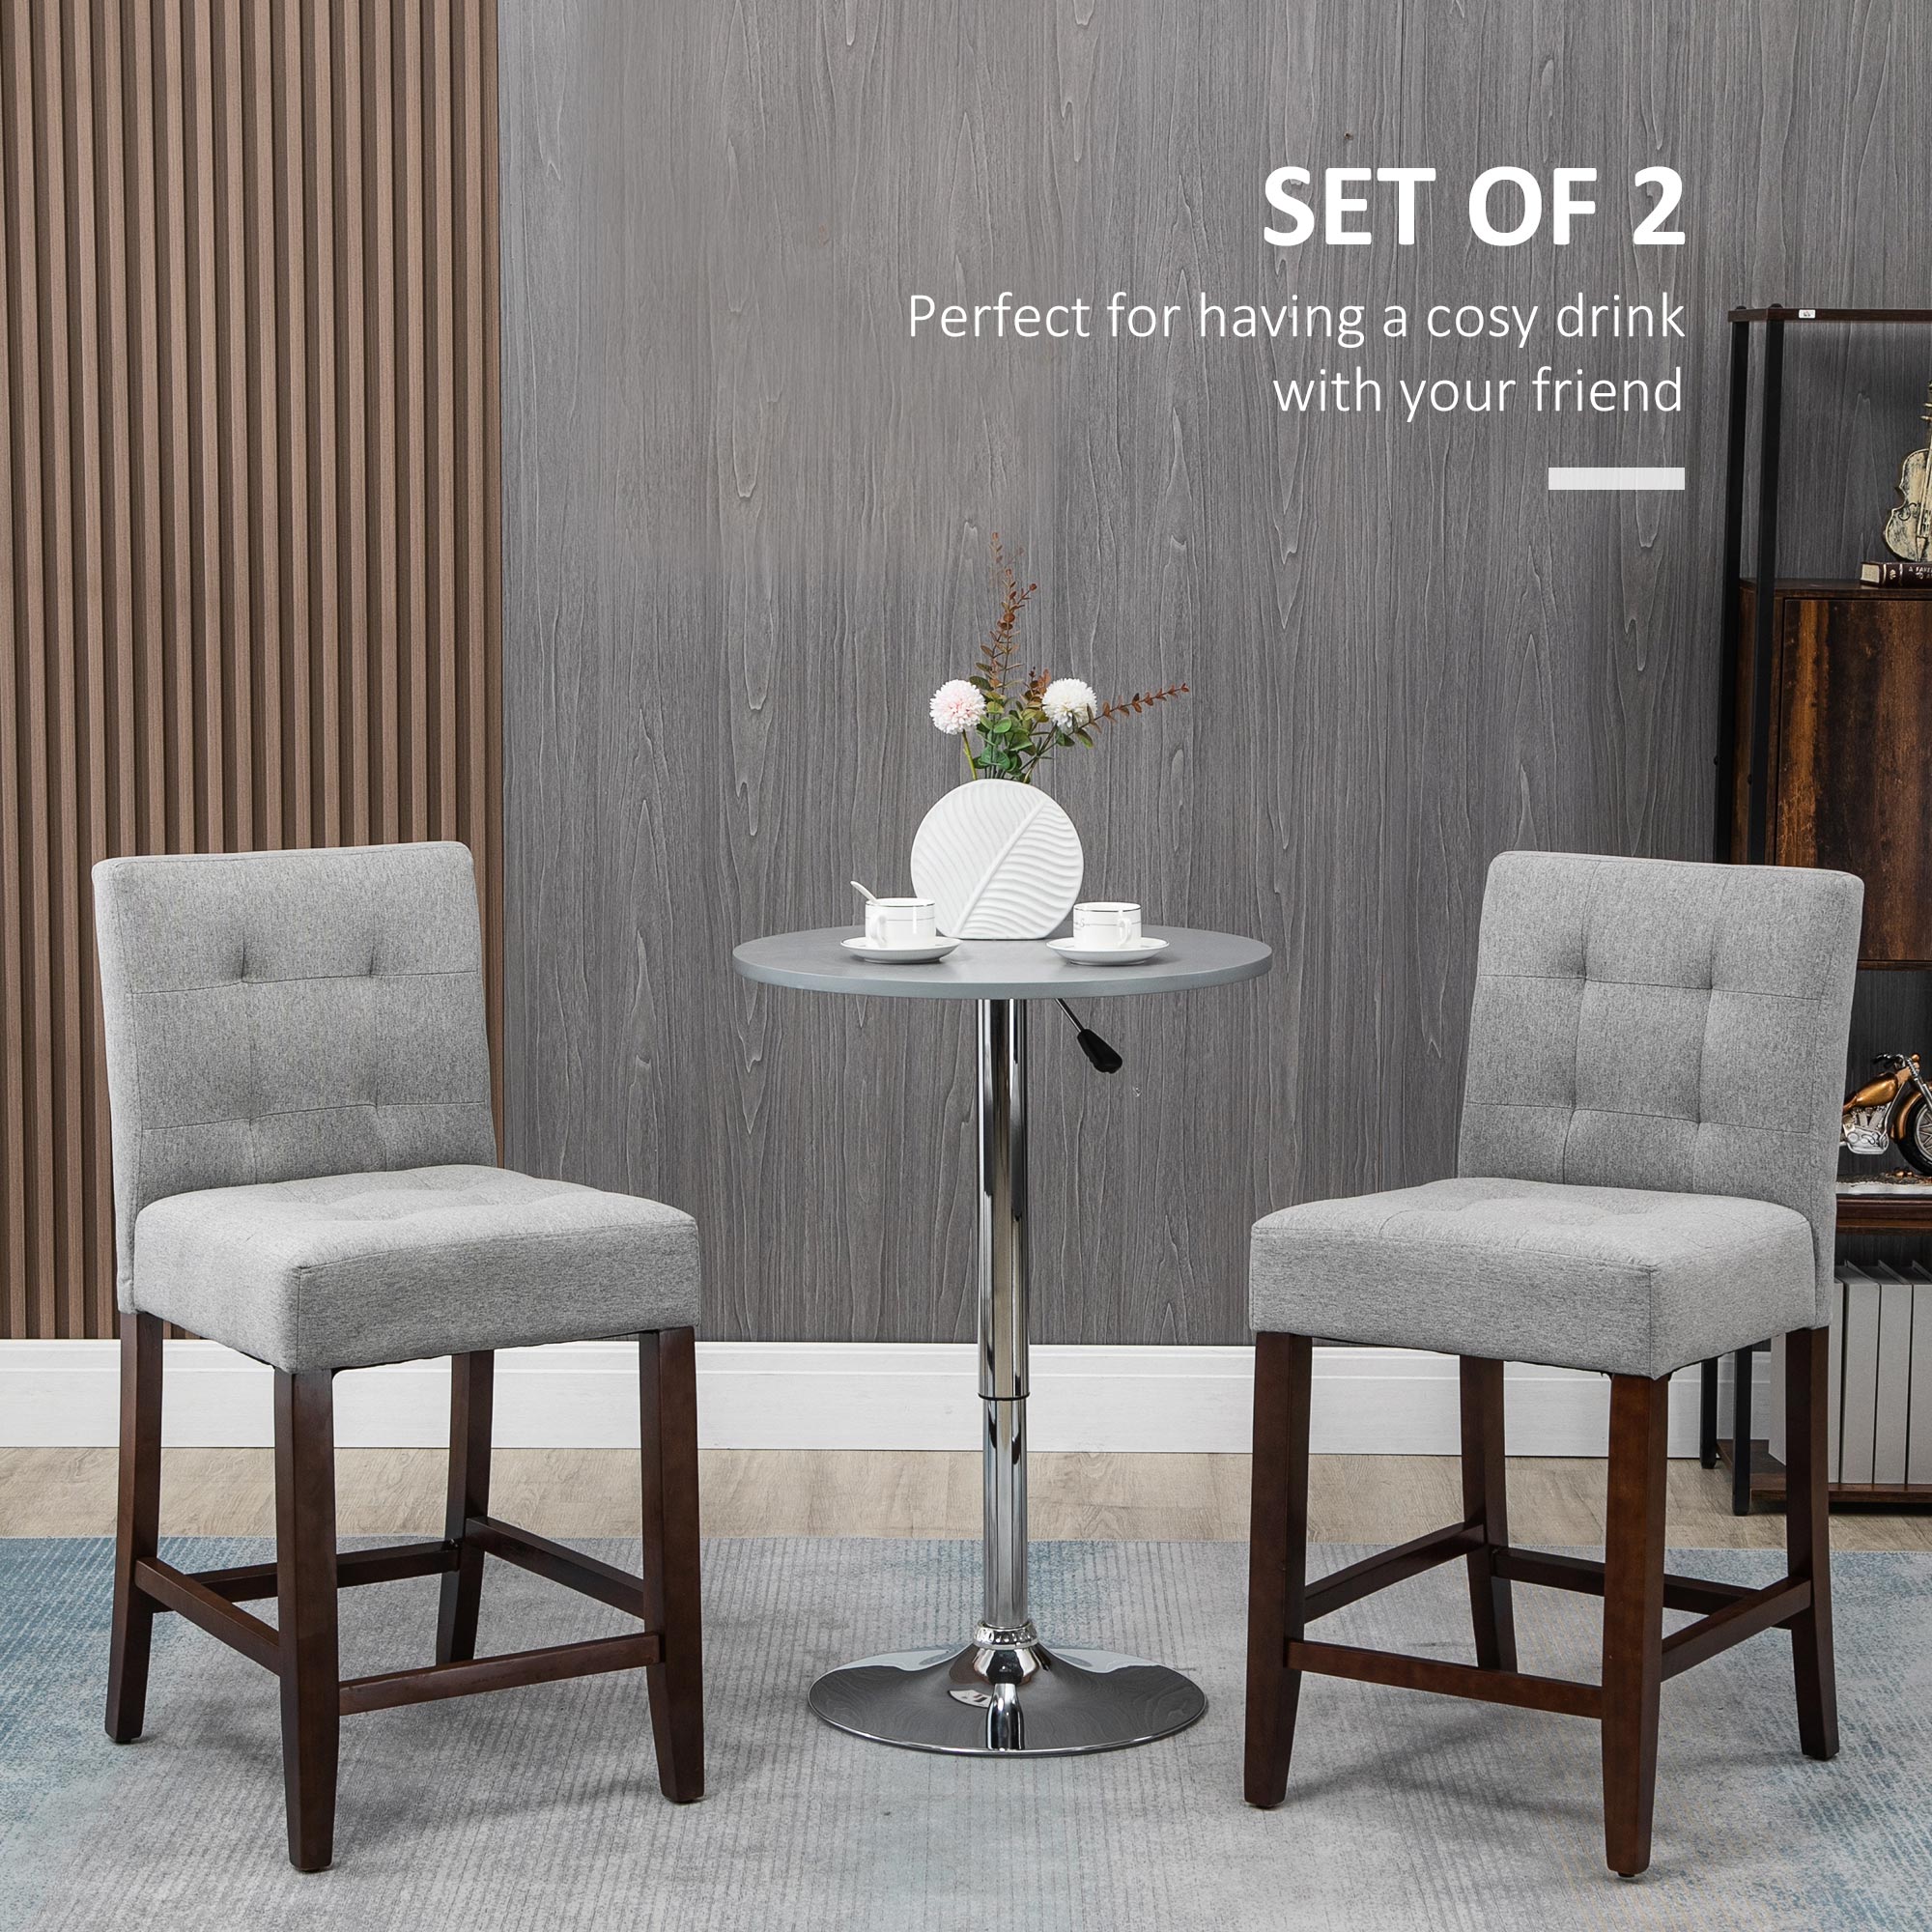 Modern Fabric Bar Stools Set of 2, Thick Padding Kitchen Stool, Bar Chairs with Tufted Back Wood Legs, Grey  AOSOM   